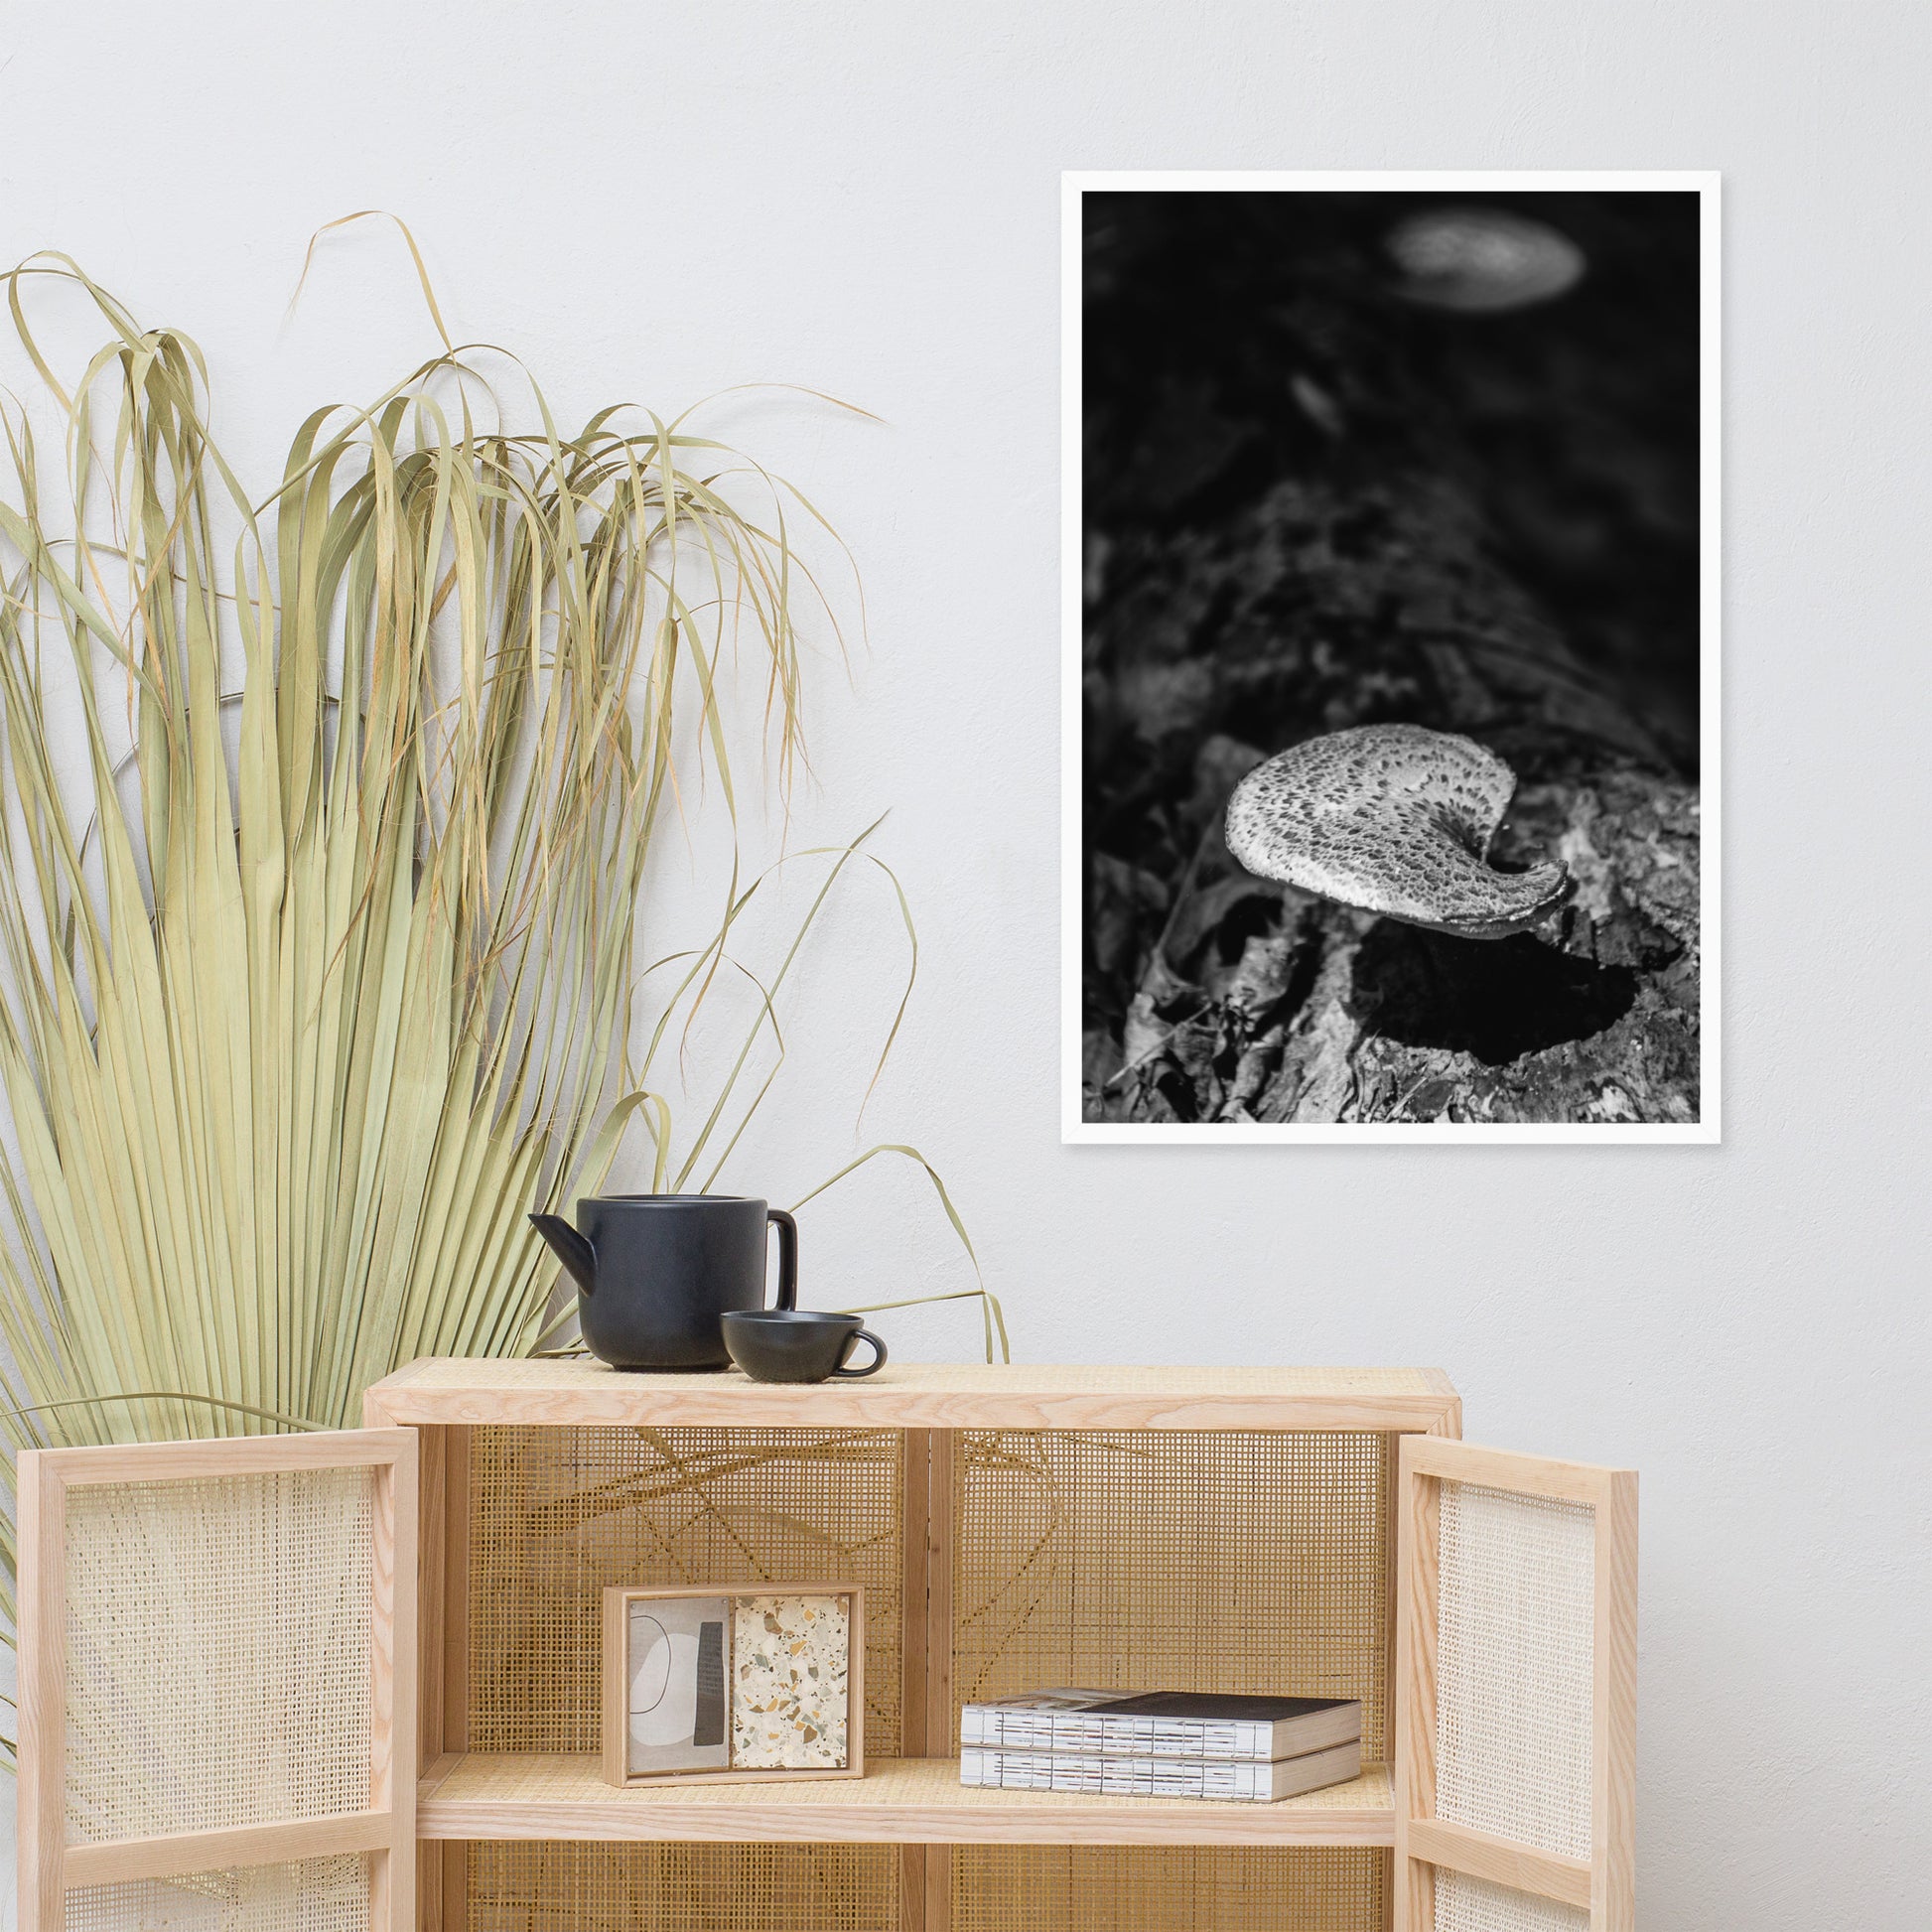 Plant Prints For Wall: Mushroom on Log in Black & White Rustic / Country Style Nature Photo Framed Wall Art Print